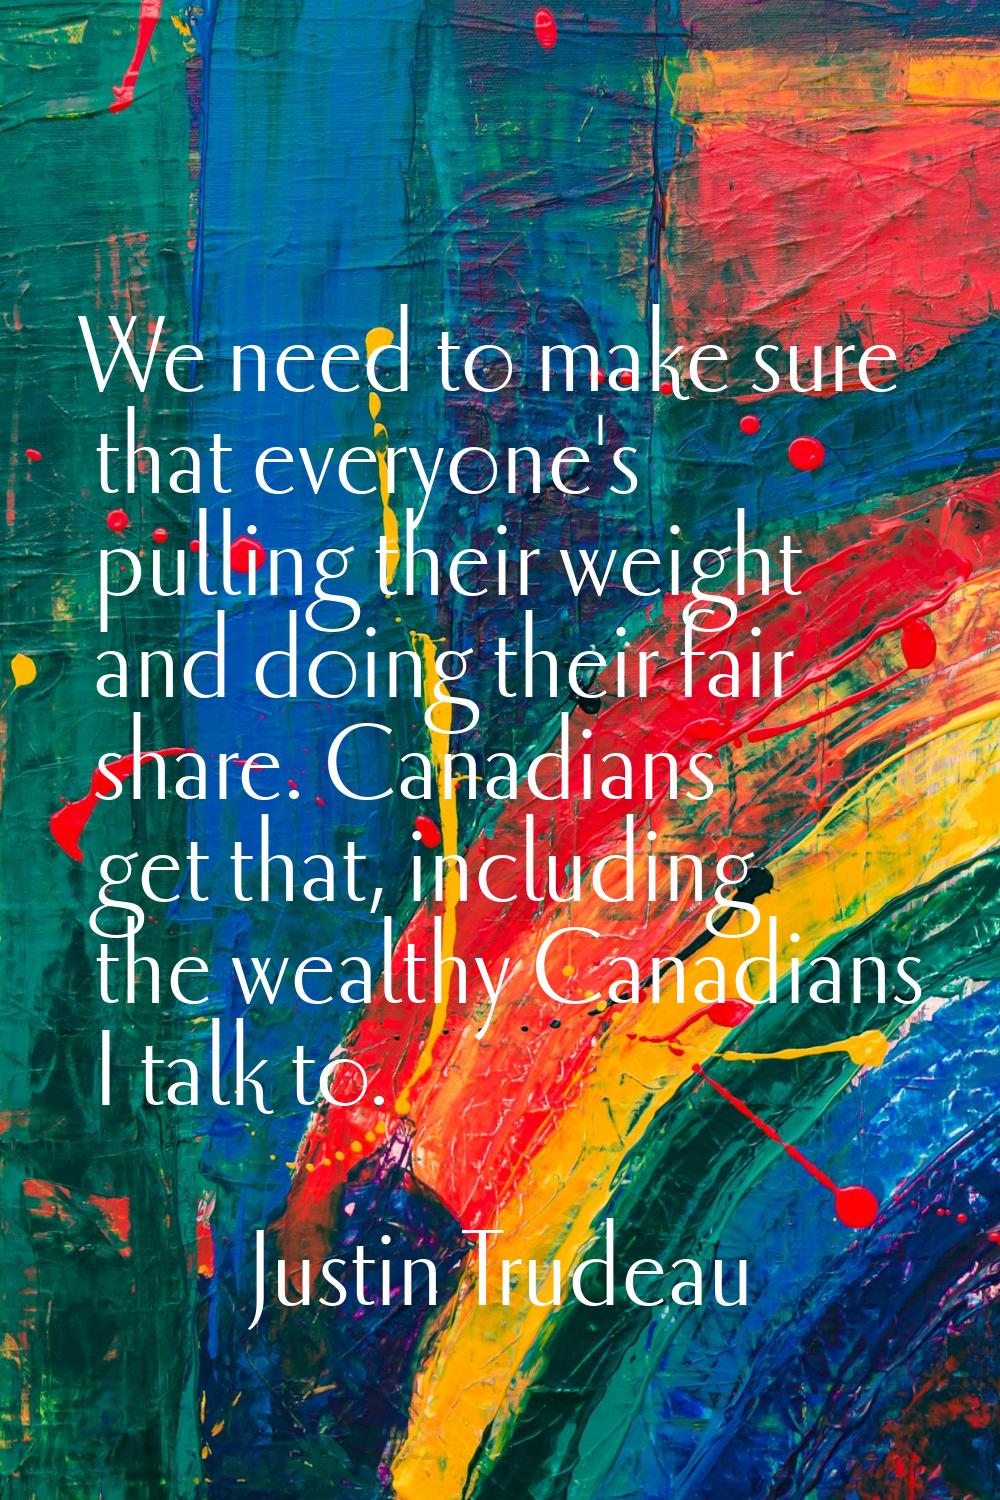 We need to make sure that everyone's pulling their weight and doing their fair share. Canadians get